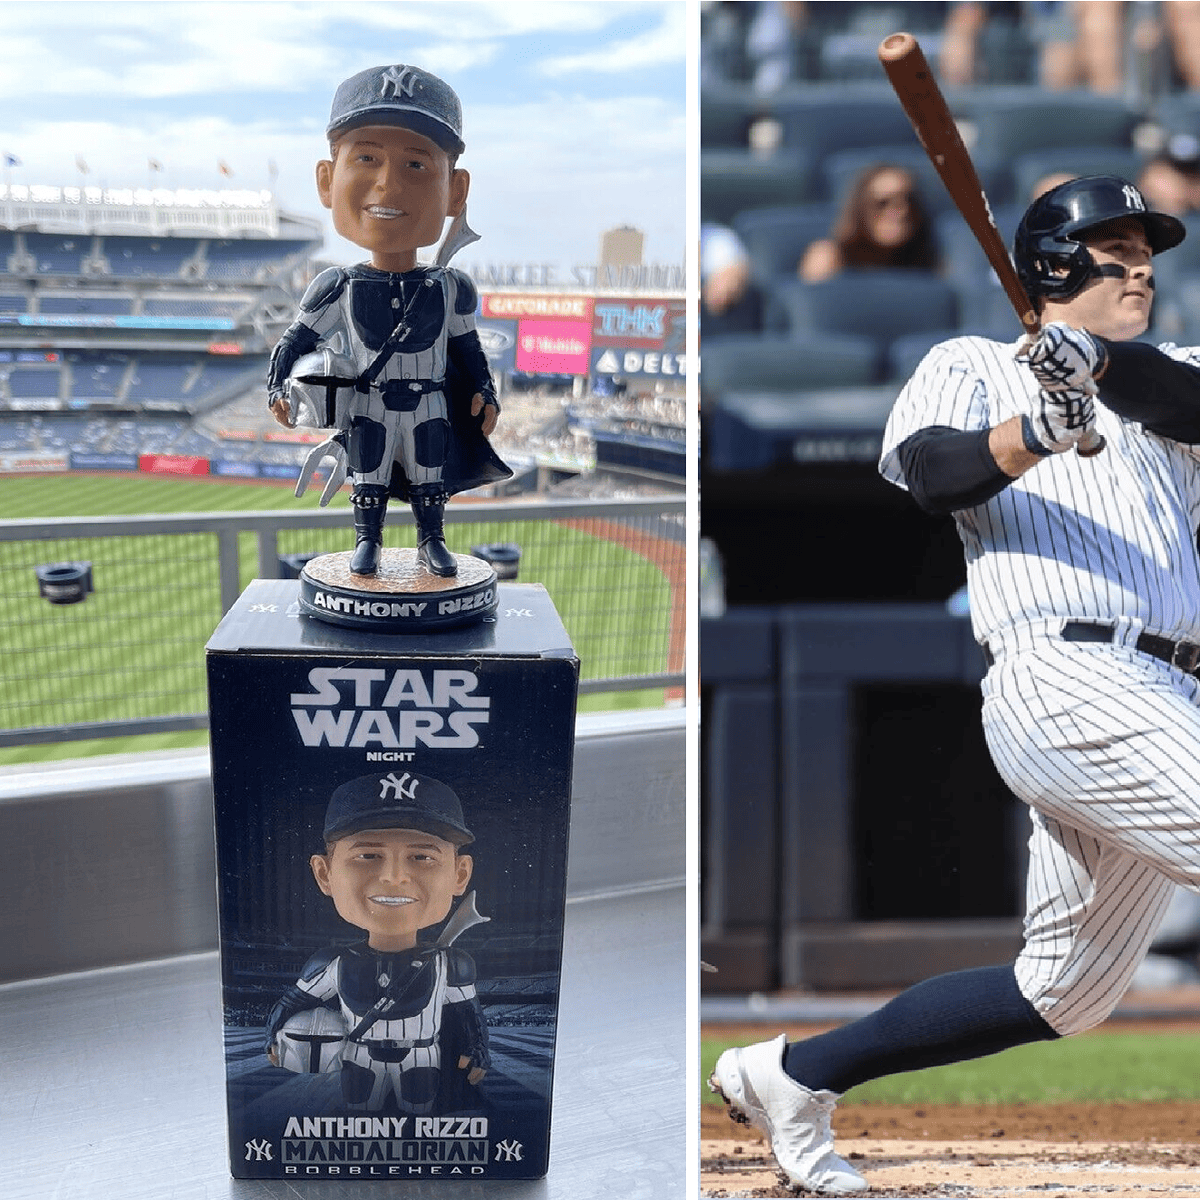 Yankees Fans Score Big With Anthony Rizzo Bobbleheads